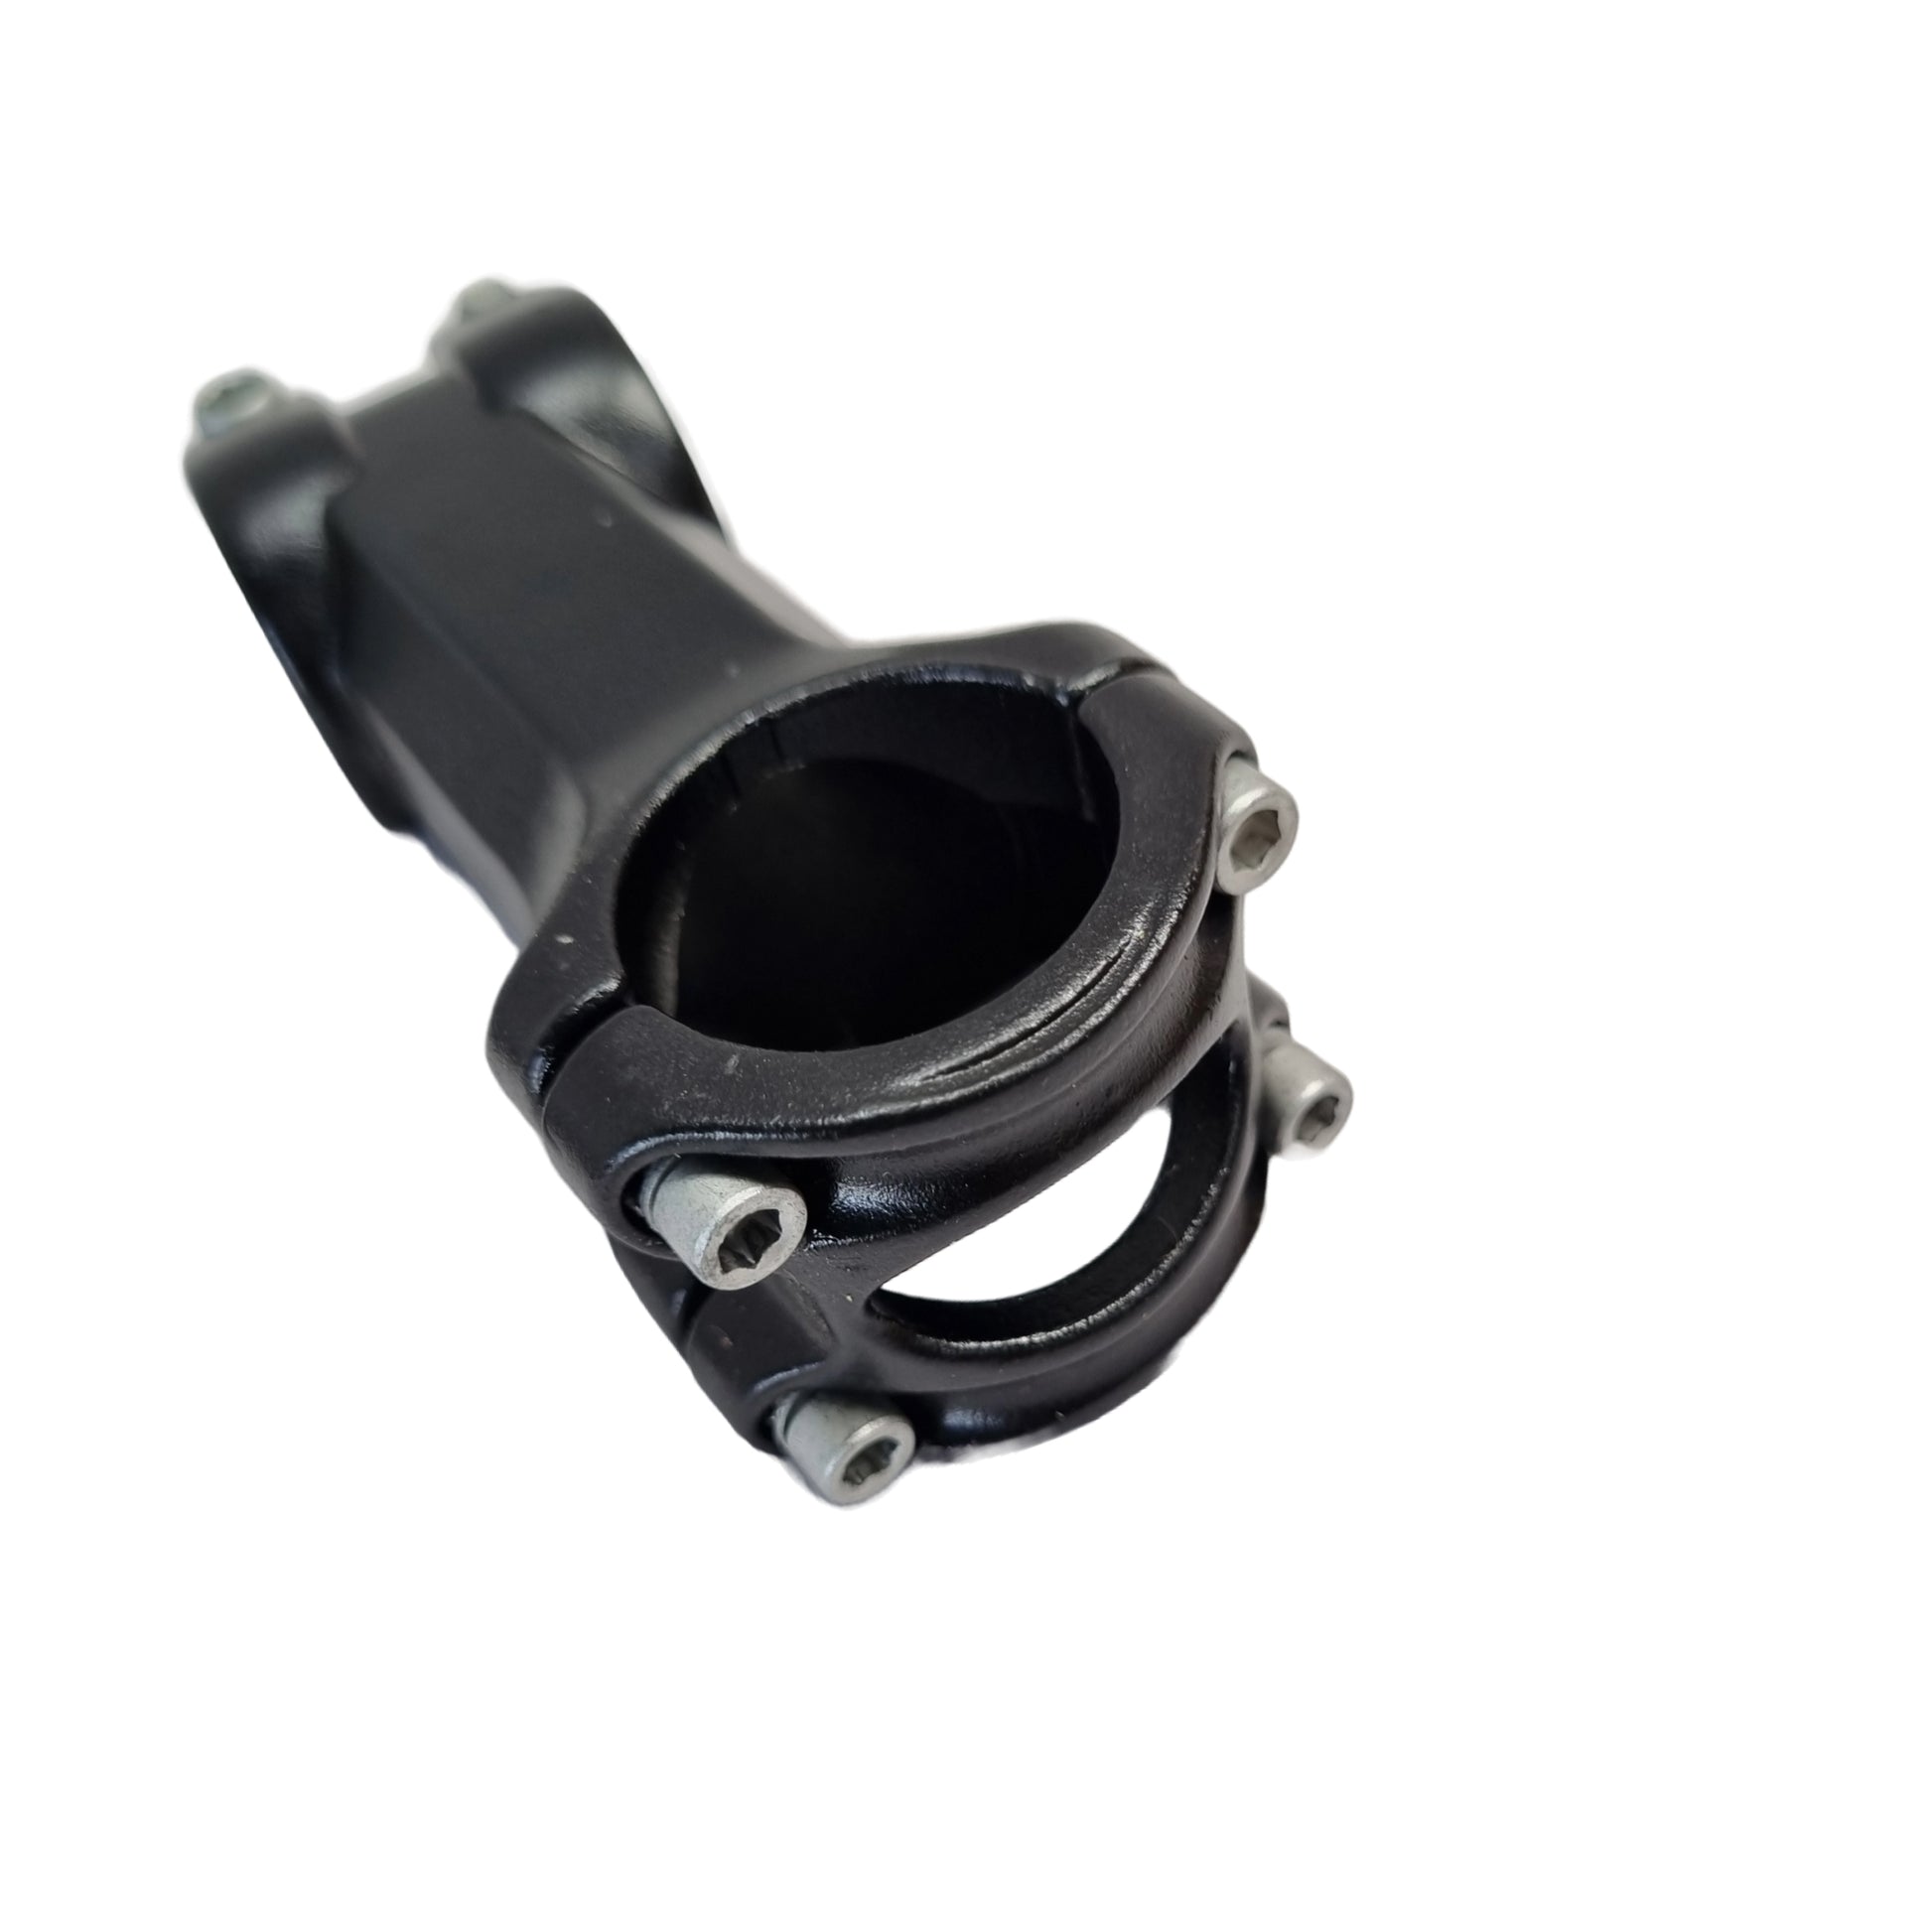 Bicycle alloy stem for threadless fork spare part front head view by omobikes